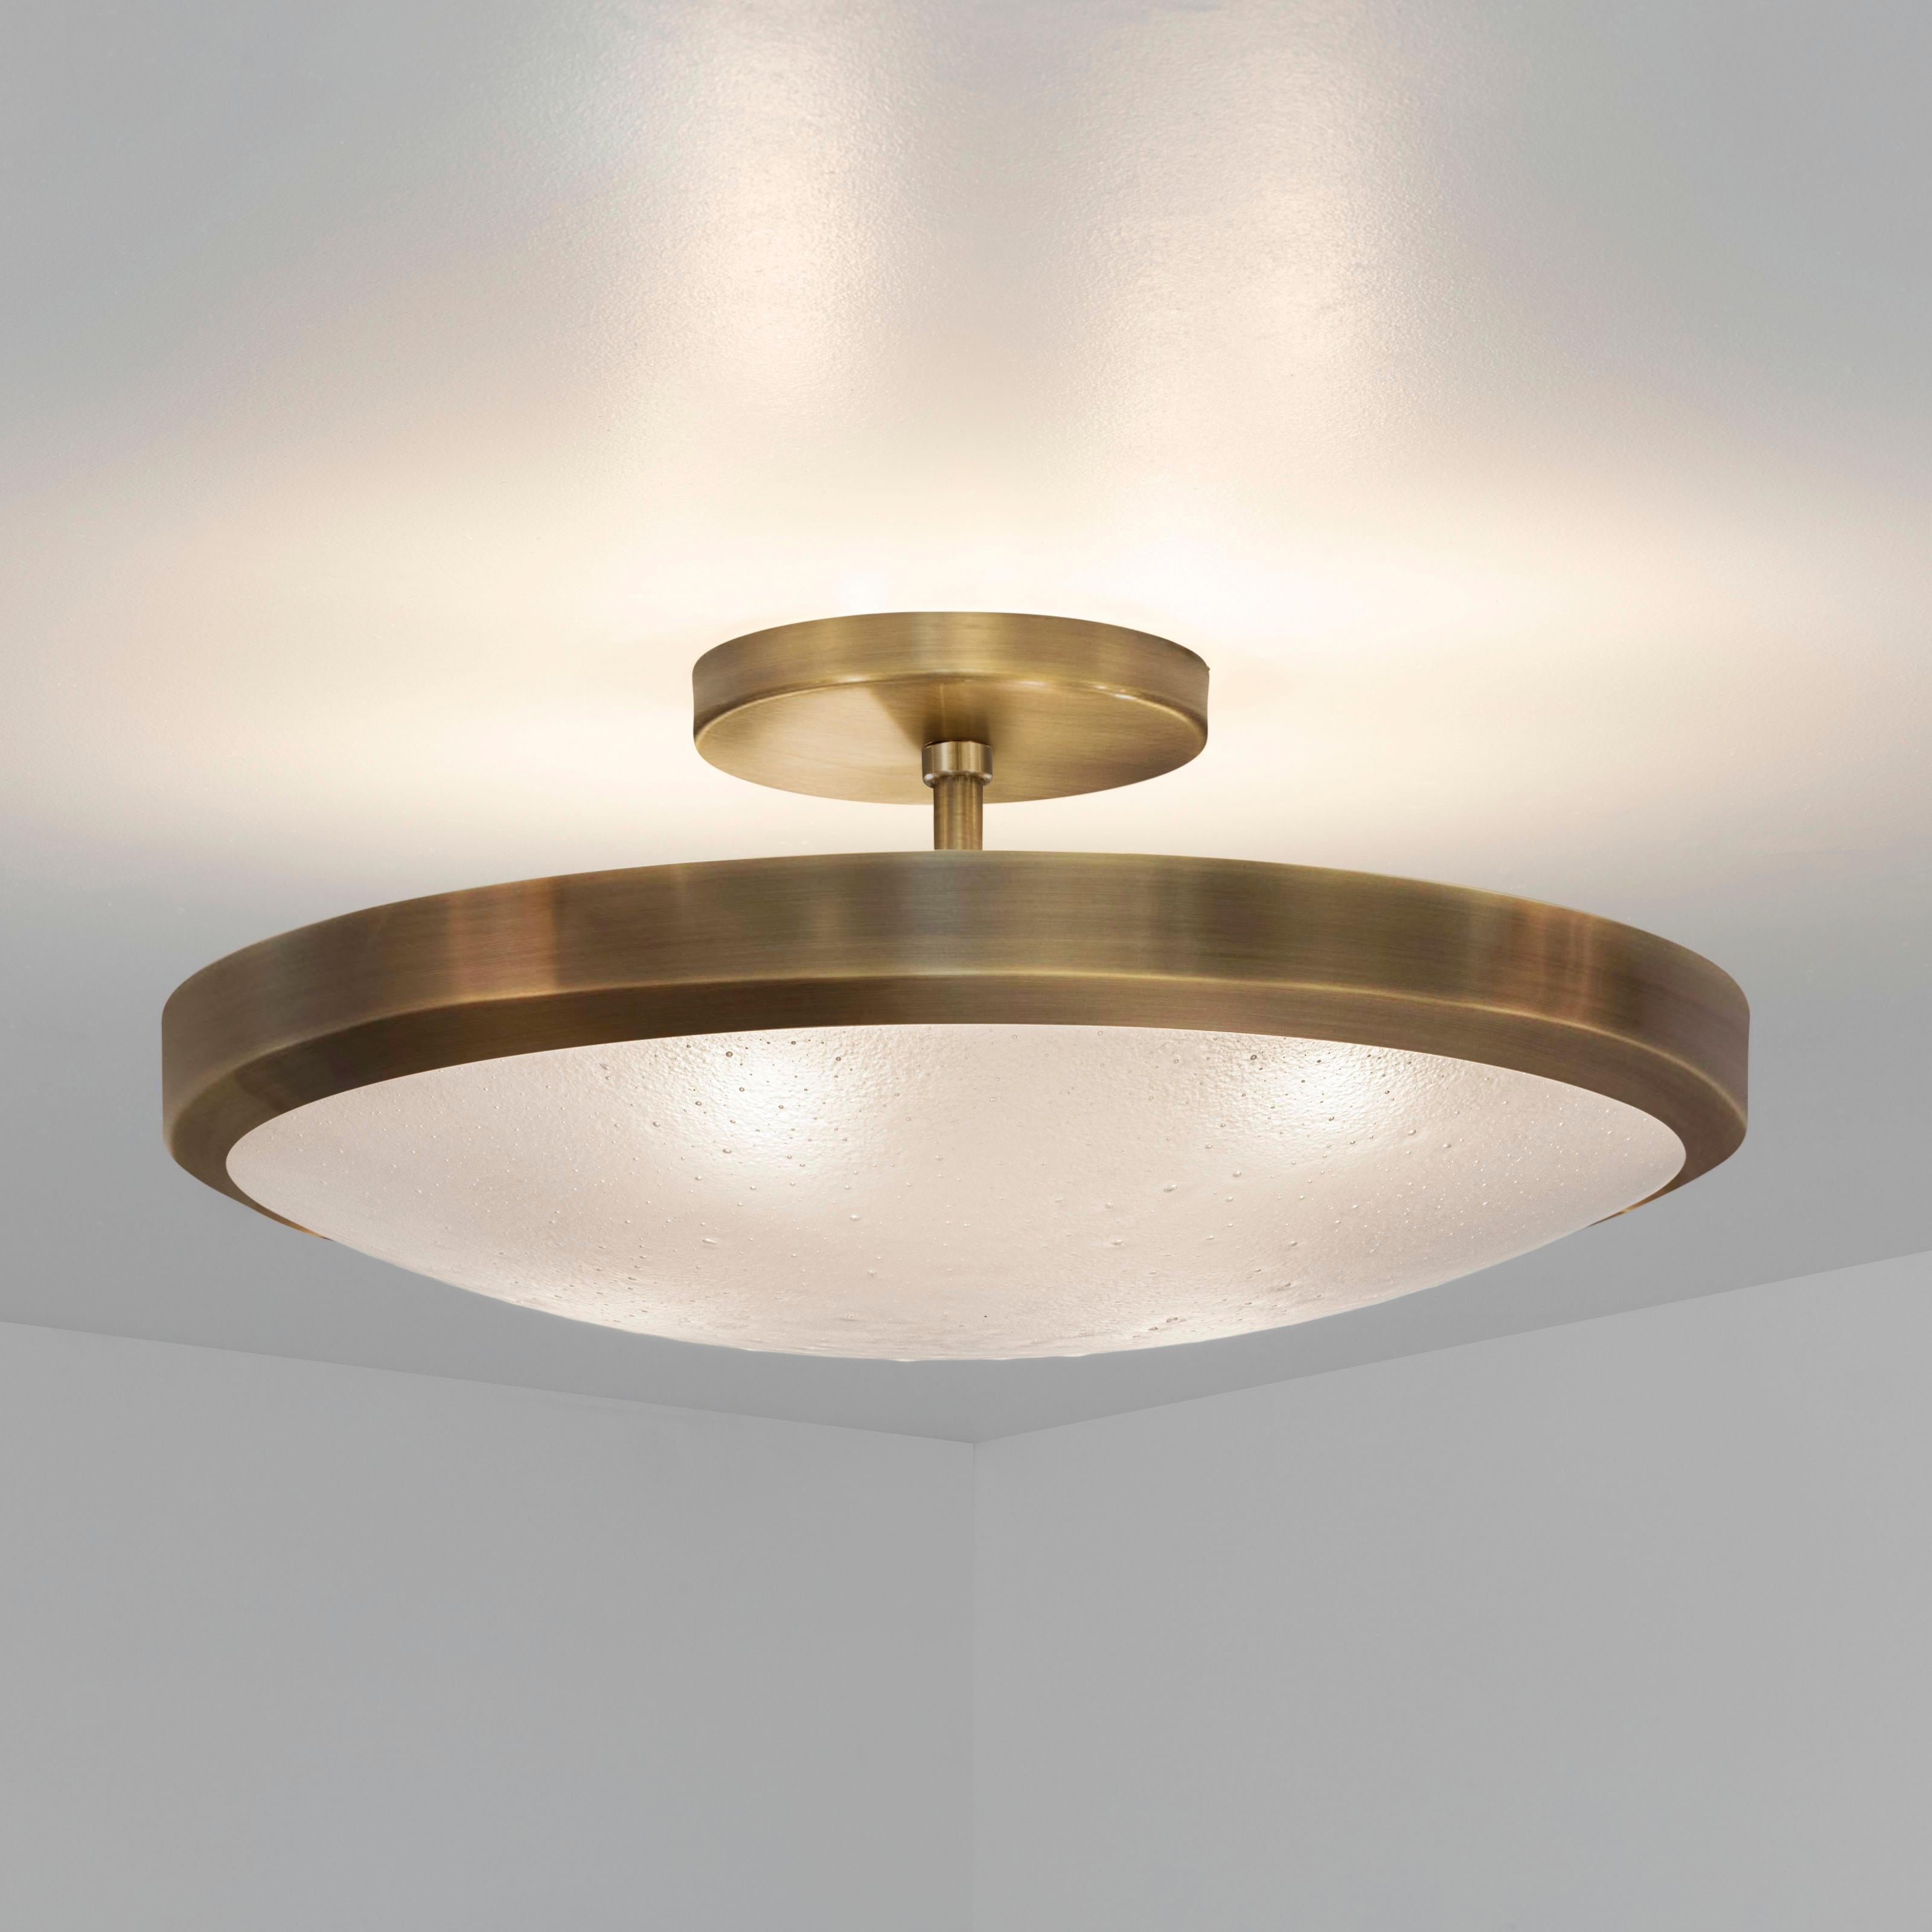 Uno Classico Semi-Flush Mount by Gaspare Asaro-Polished Nickel Finish  In New Condition For Sale In New York, NY